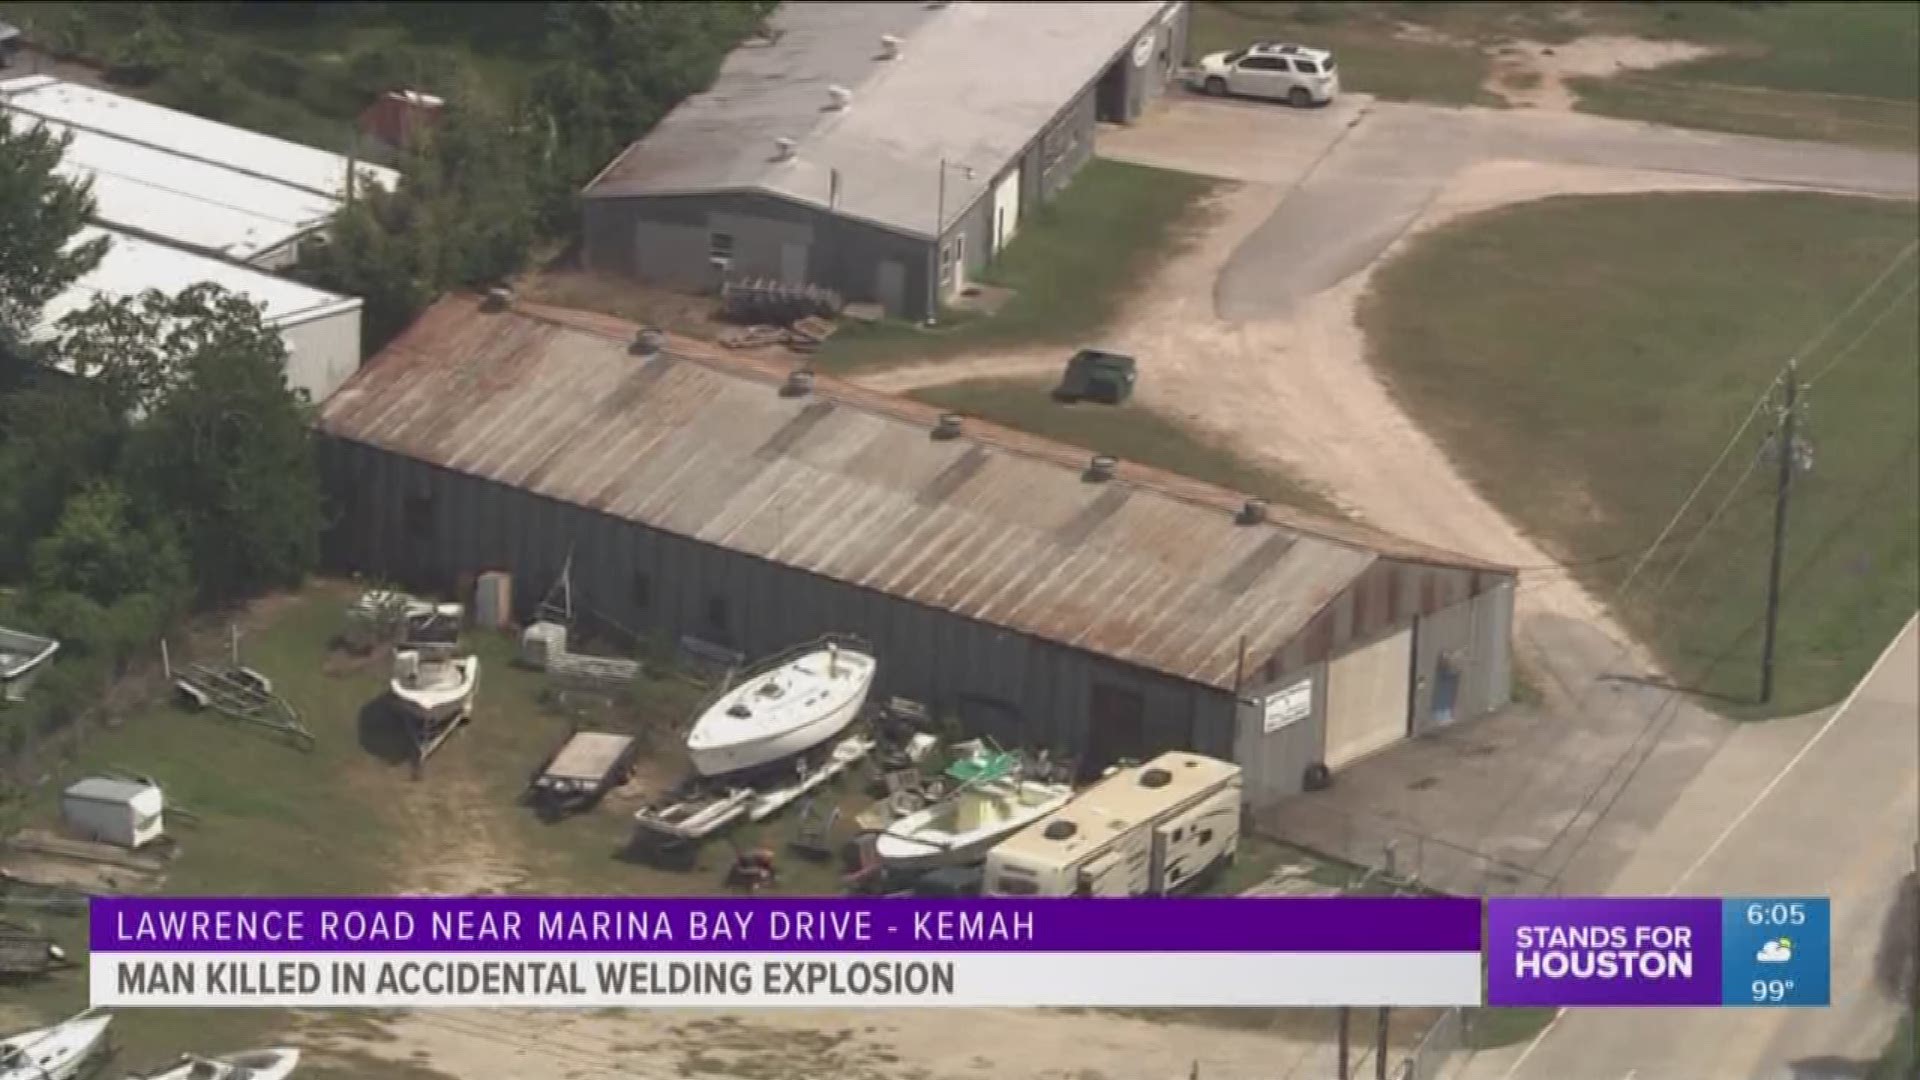 A man has died after an accidental welding explosion in Kemah.